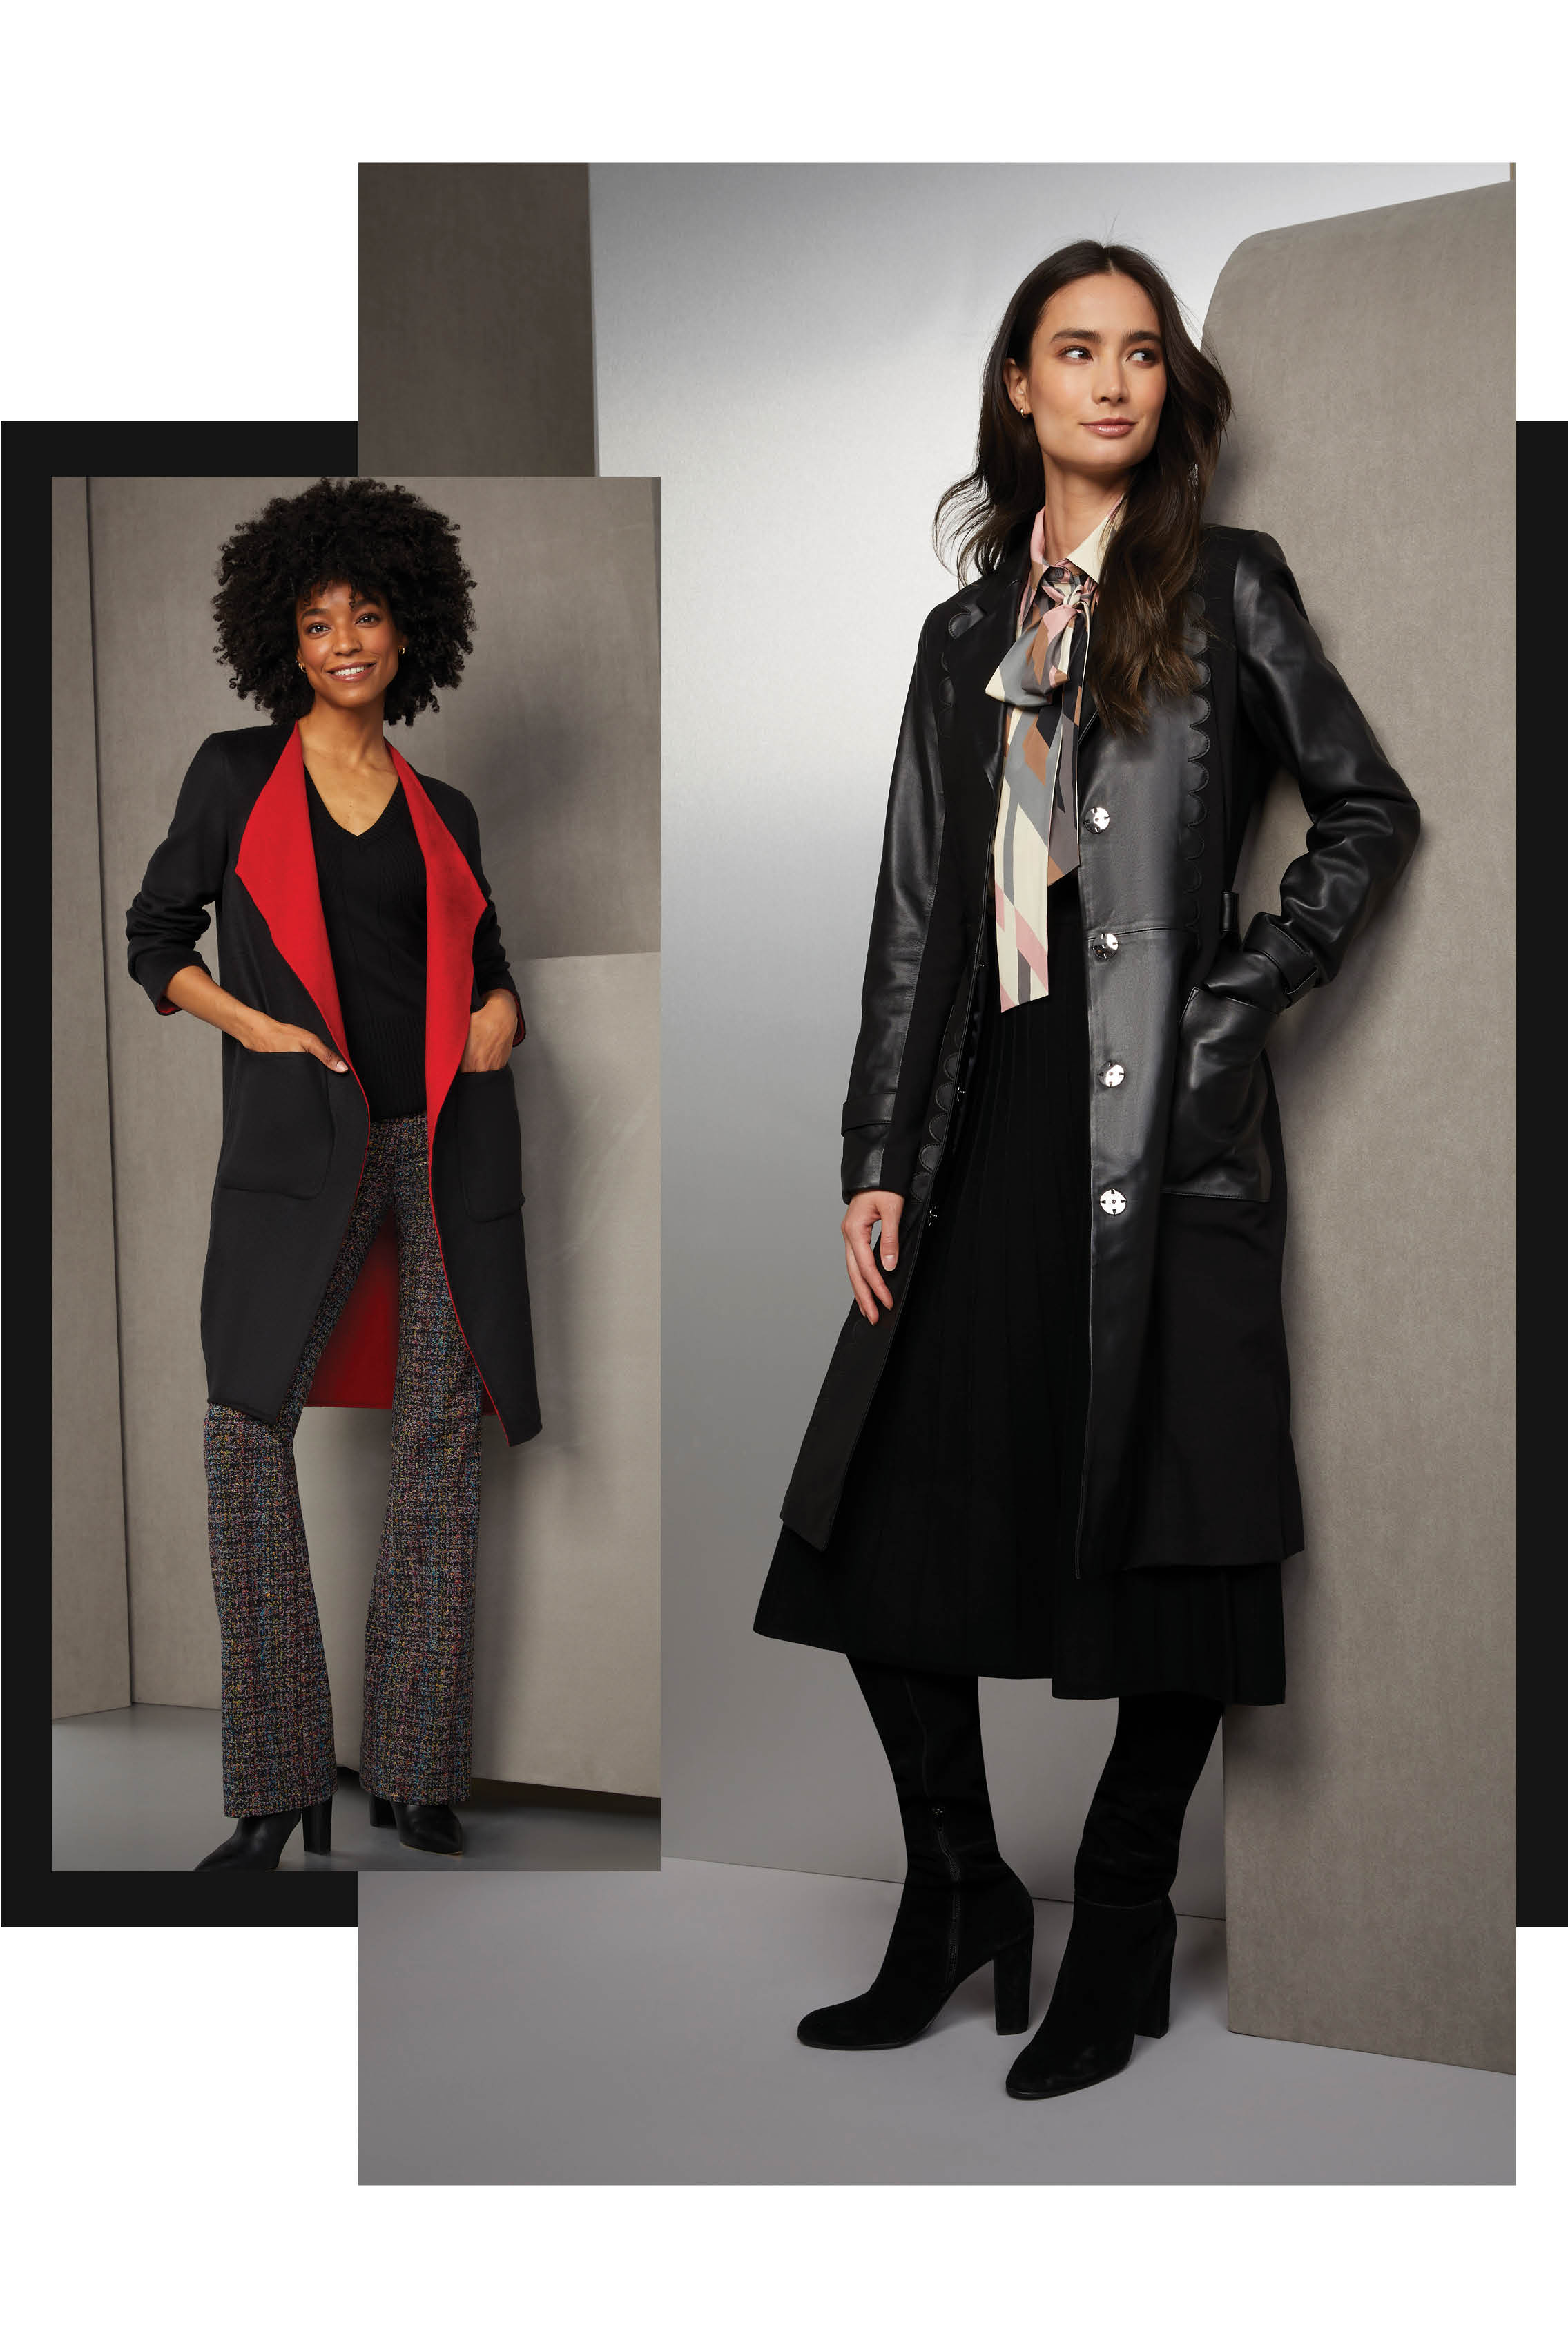 Harness color with chic details. The black Italian double-faced, wool-blend coat is accented with jester red, which pulls out the cabernet red and black of the radiant, eight-color Italian tweed pants.